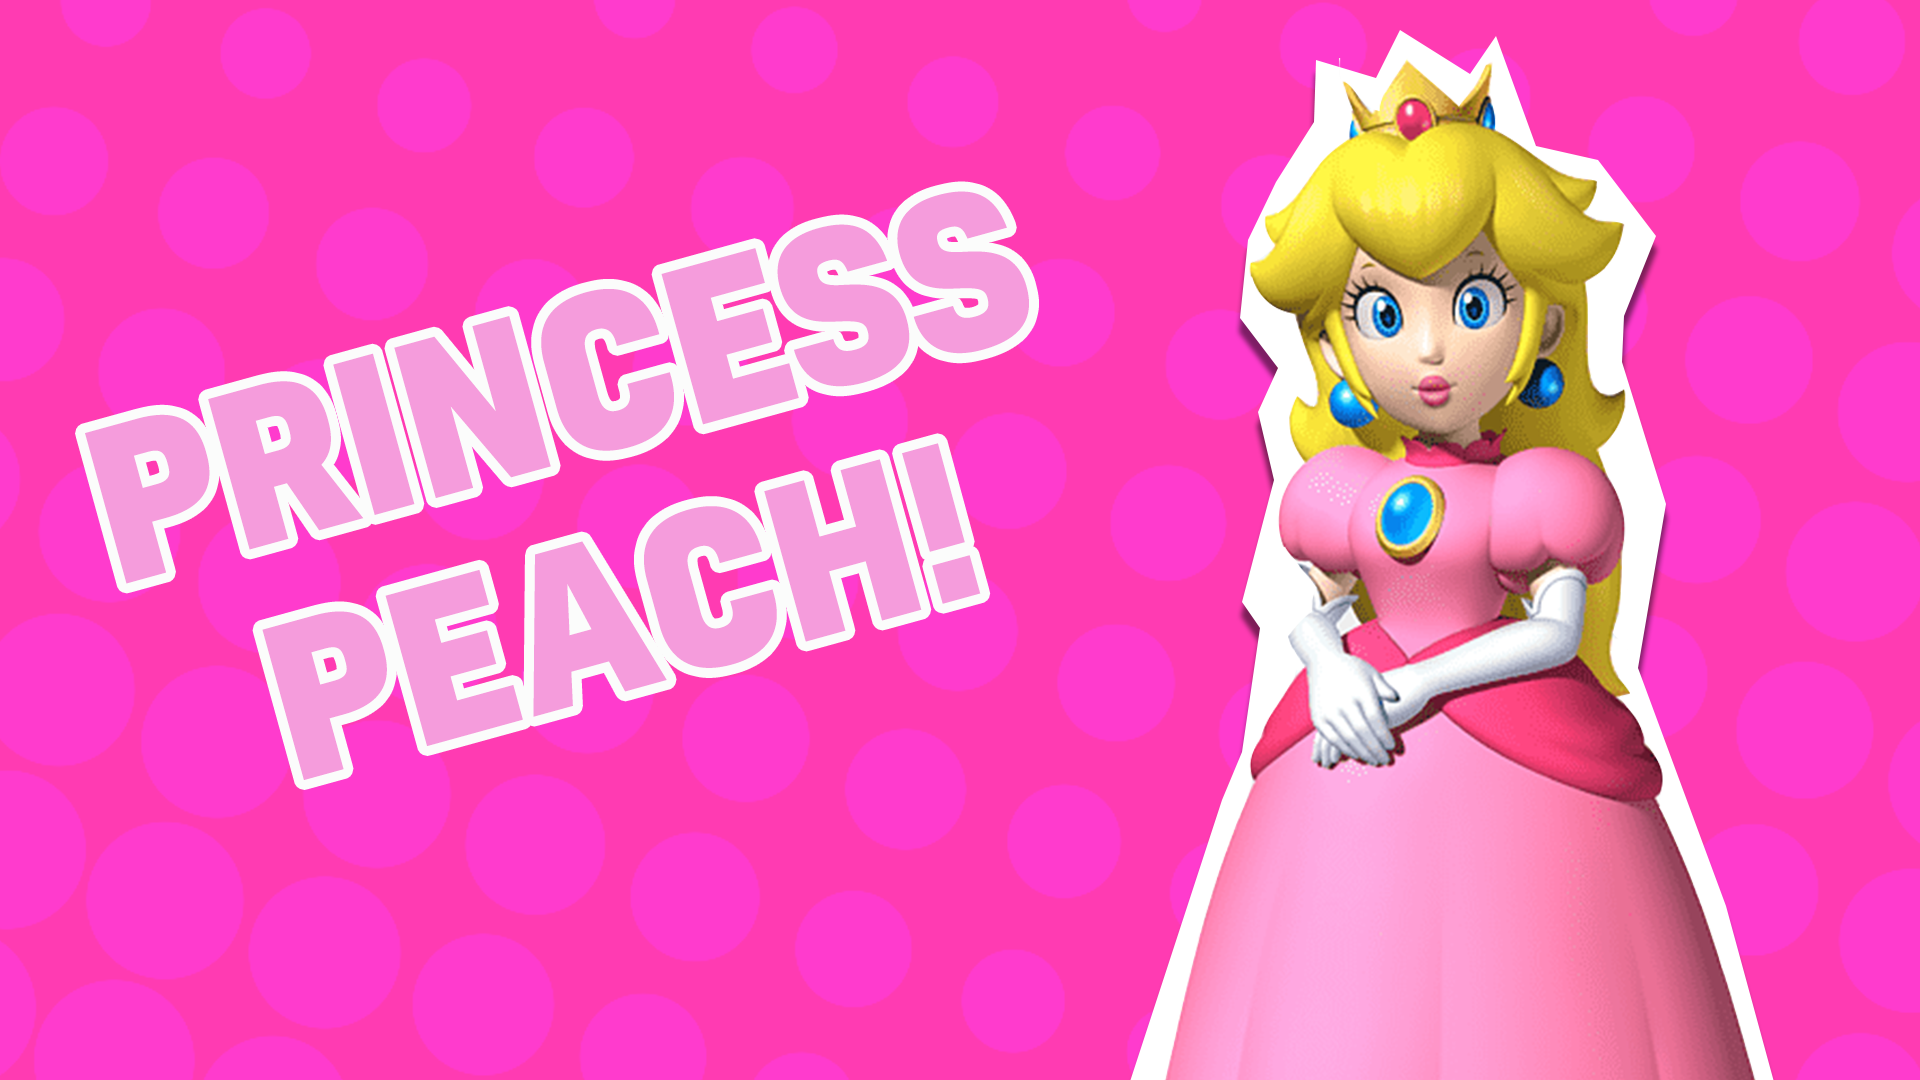 You're Princess Peach! You're kind, sweet and you always try your best at everything! But just because you've got a soft side doesn't mean people should underestimate you!